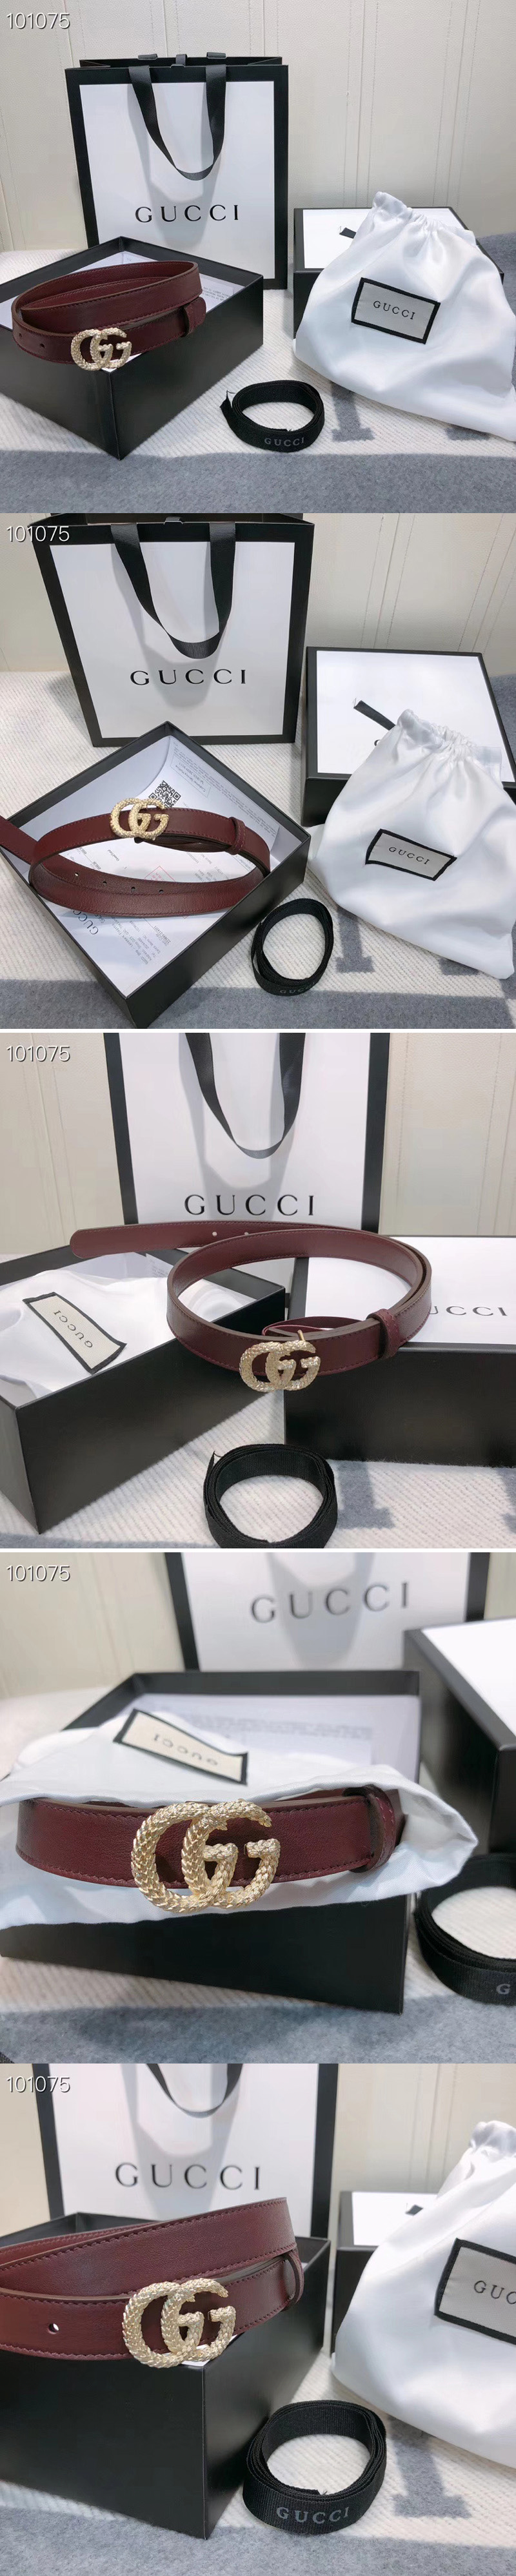 Replica Women's Gucci 2cm Leather belt with torchon Double G buckle in Bordeaux Leather